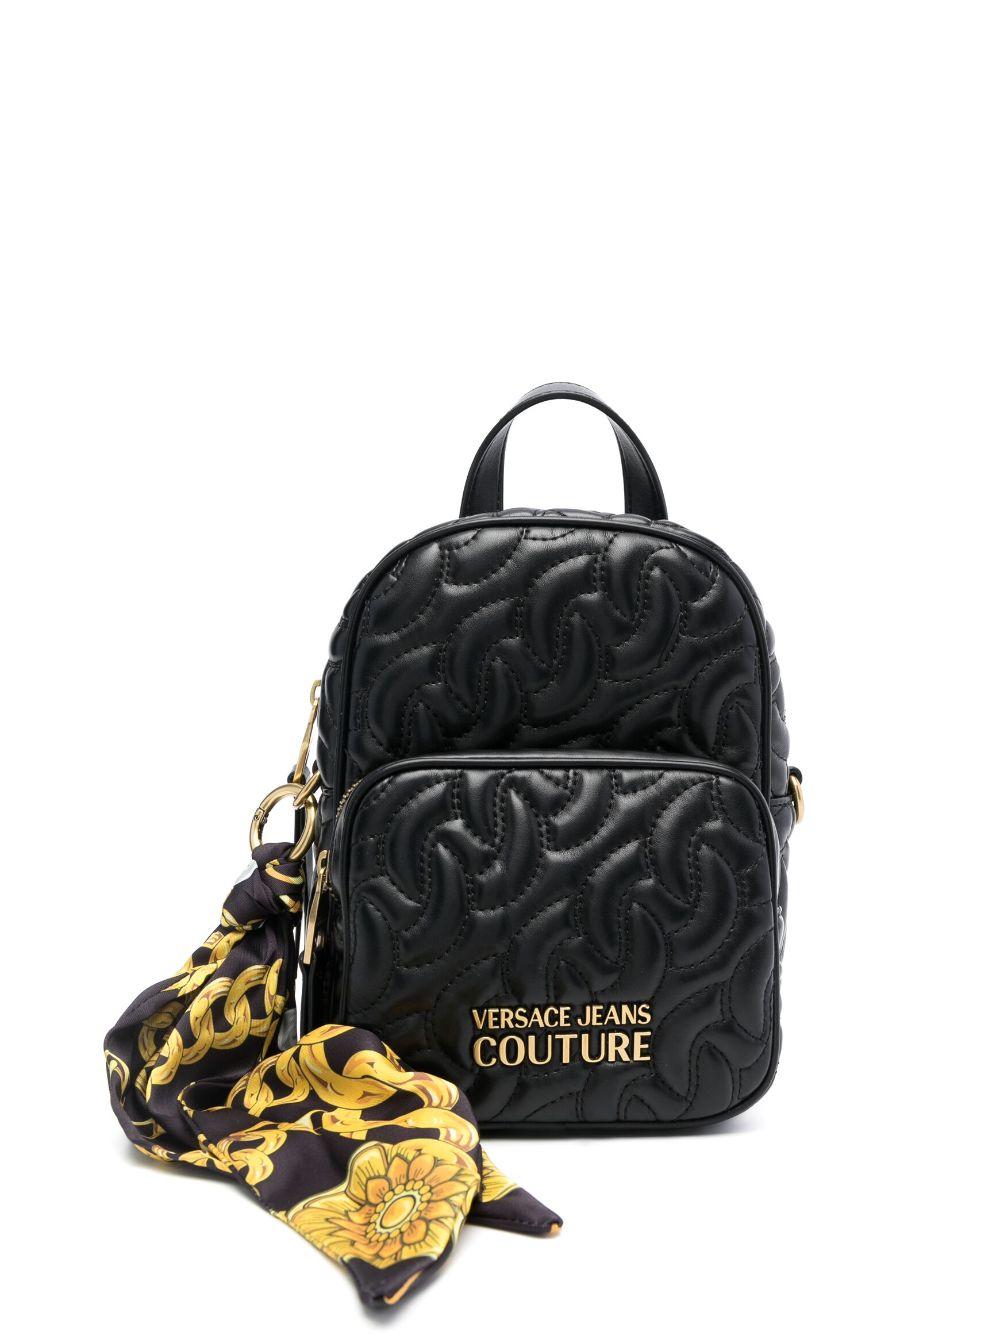 Versace Jeans Couture Quilted Faux-leather Backpack in Black | Lyst